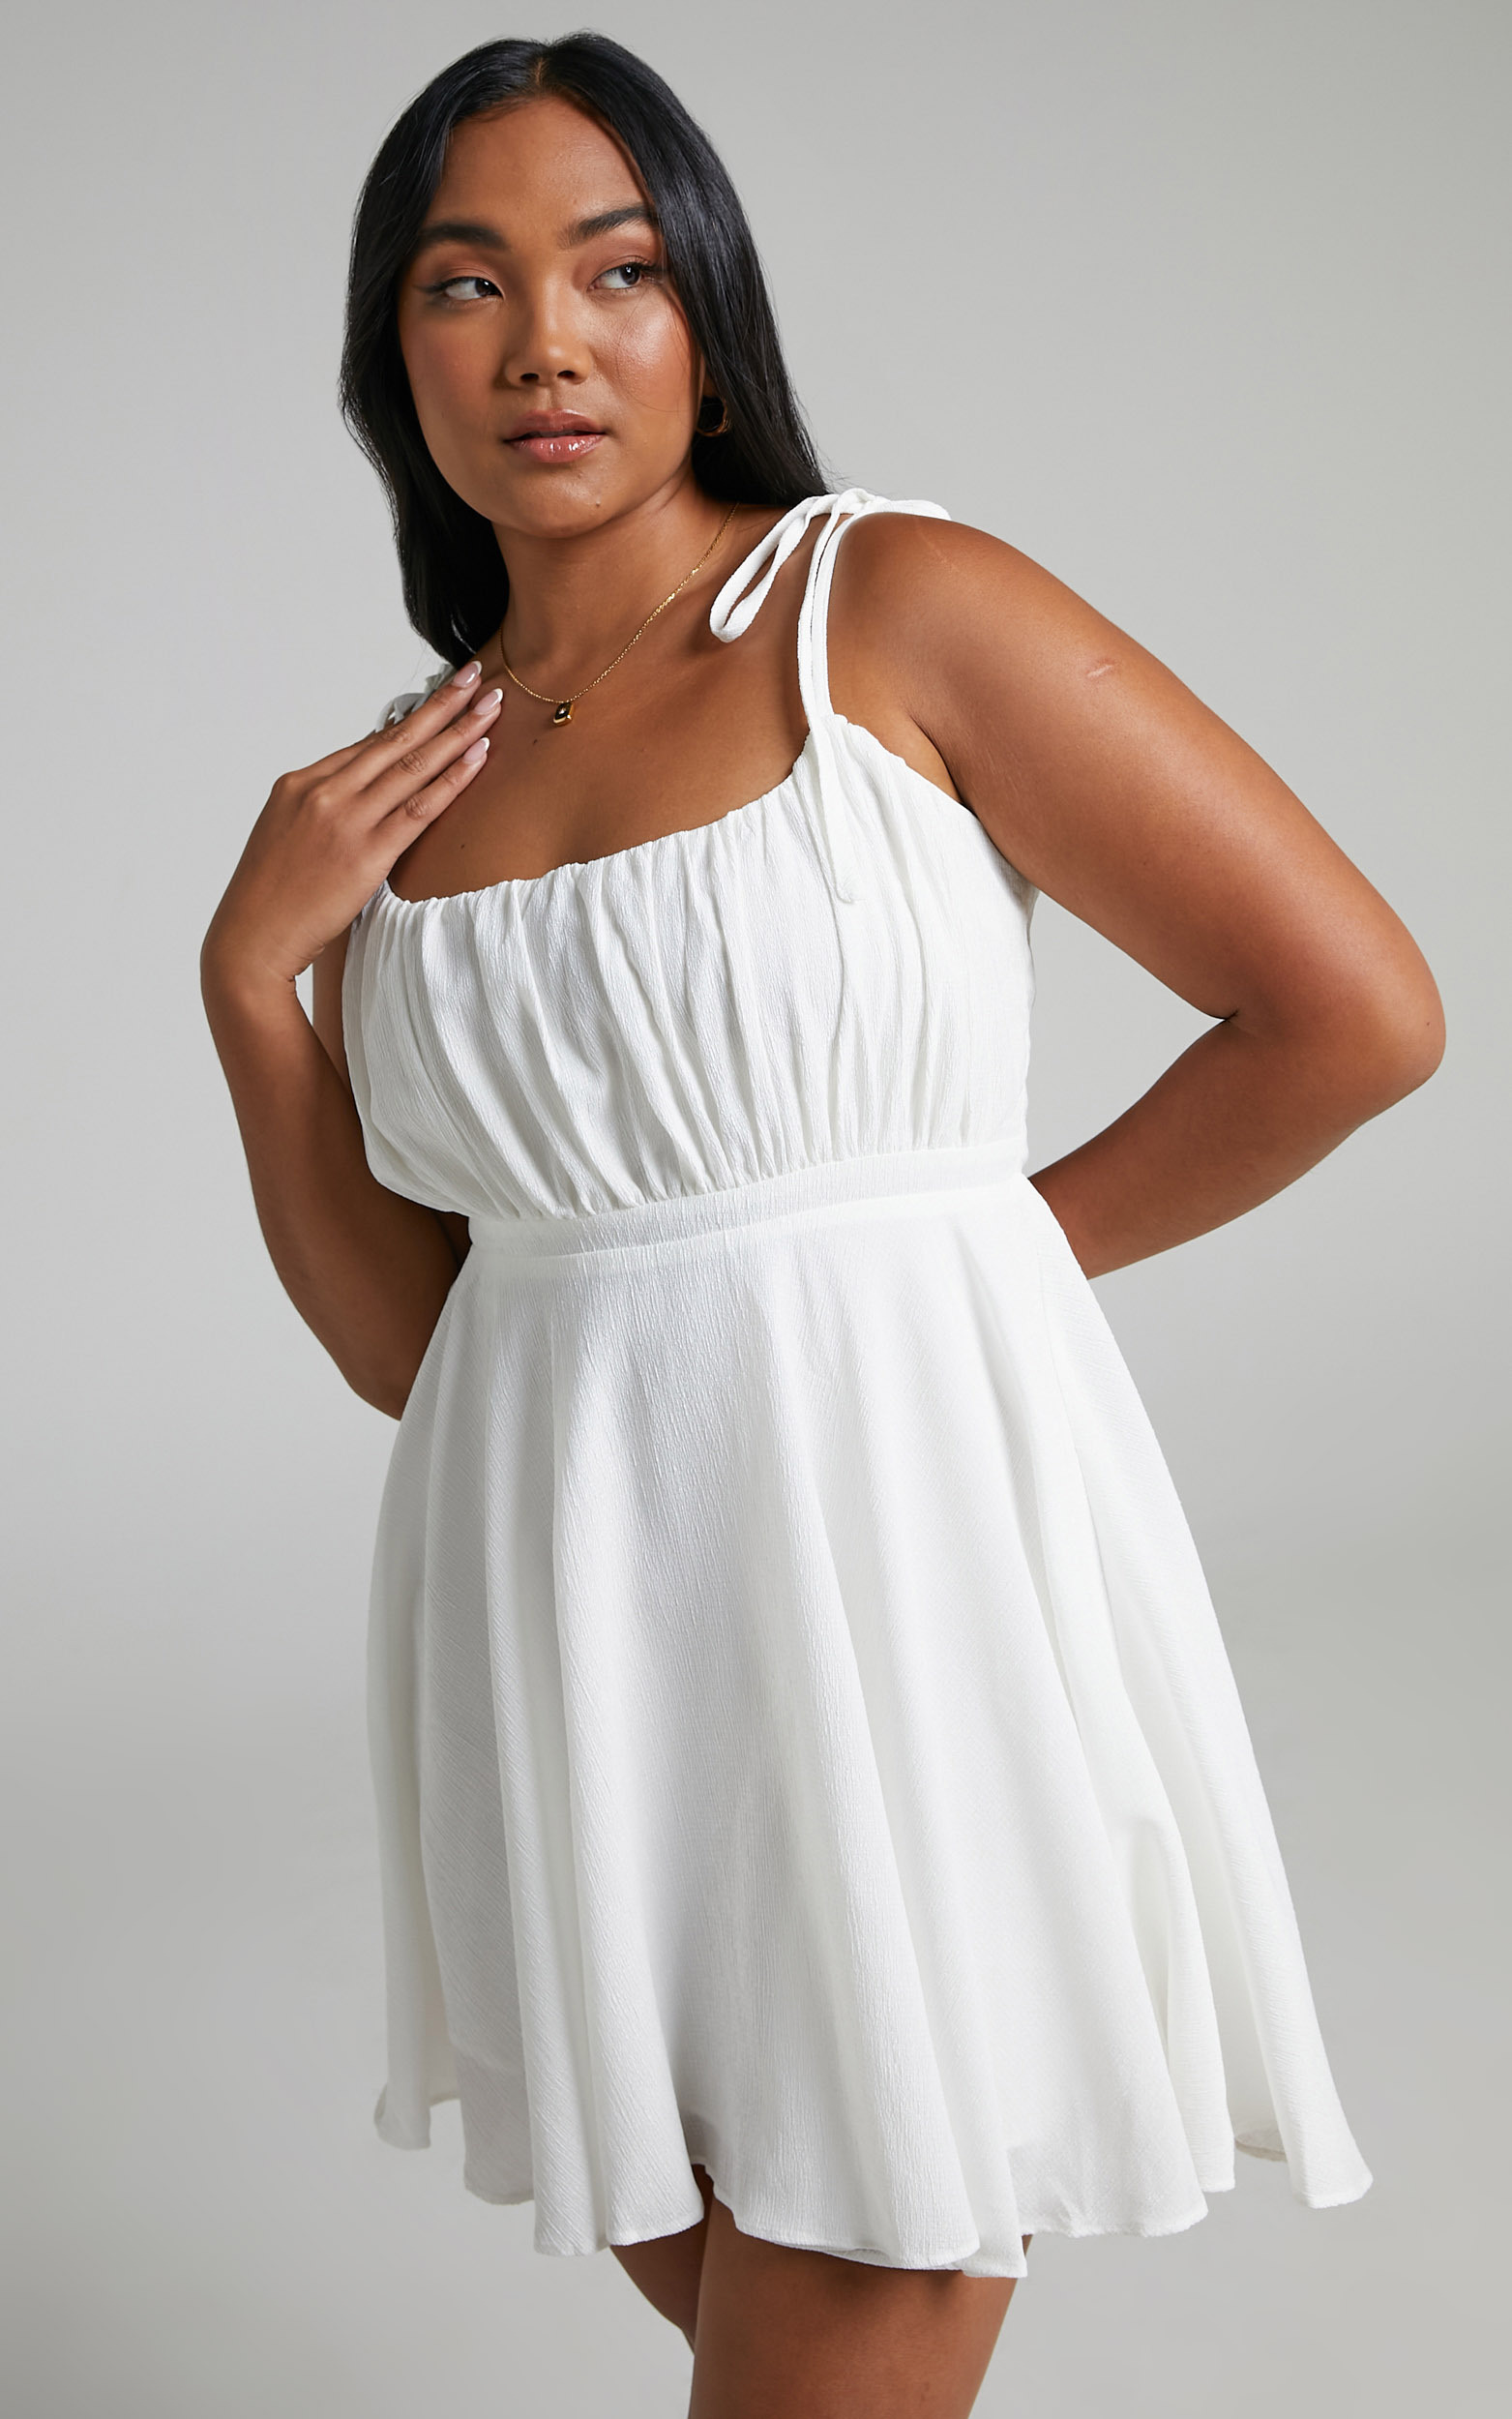 Aziah Mini Dress - Tie Shoulder Ruched Bodice Dress in White - 06, WHT1, hi-res image number null